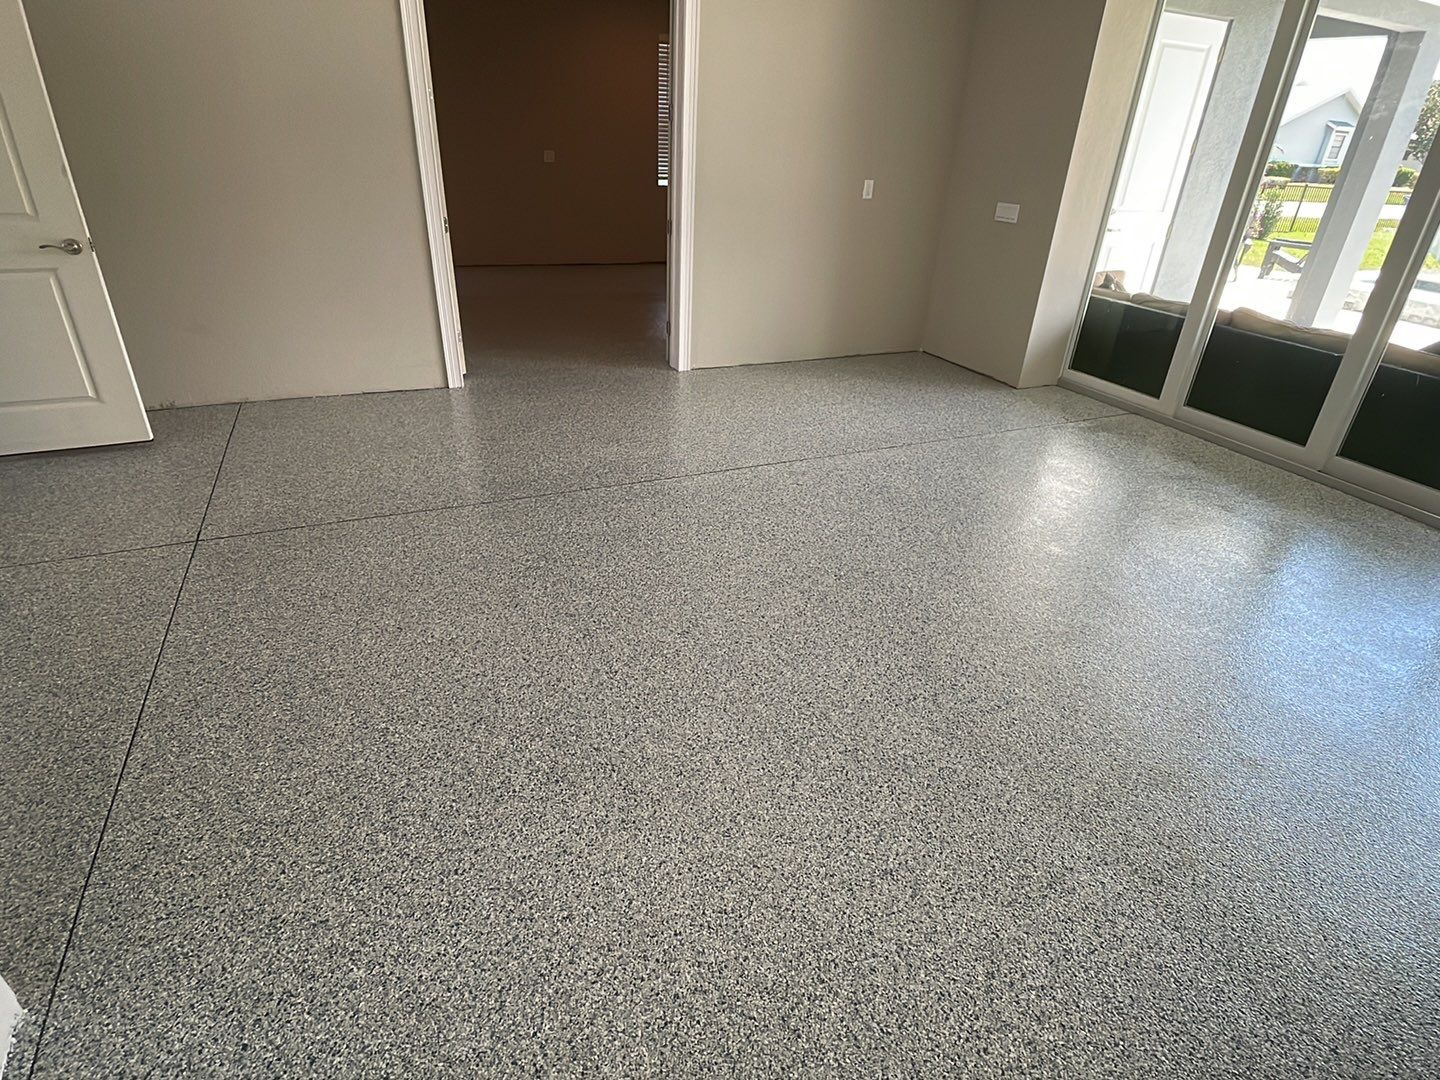 interior room after concrete coating has been applied to previously bare concrete floor